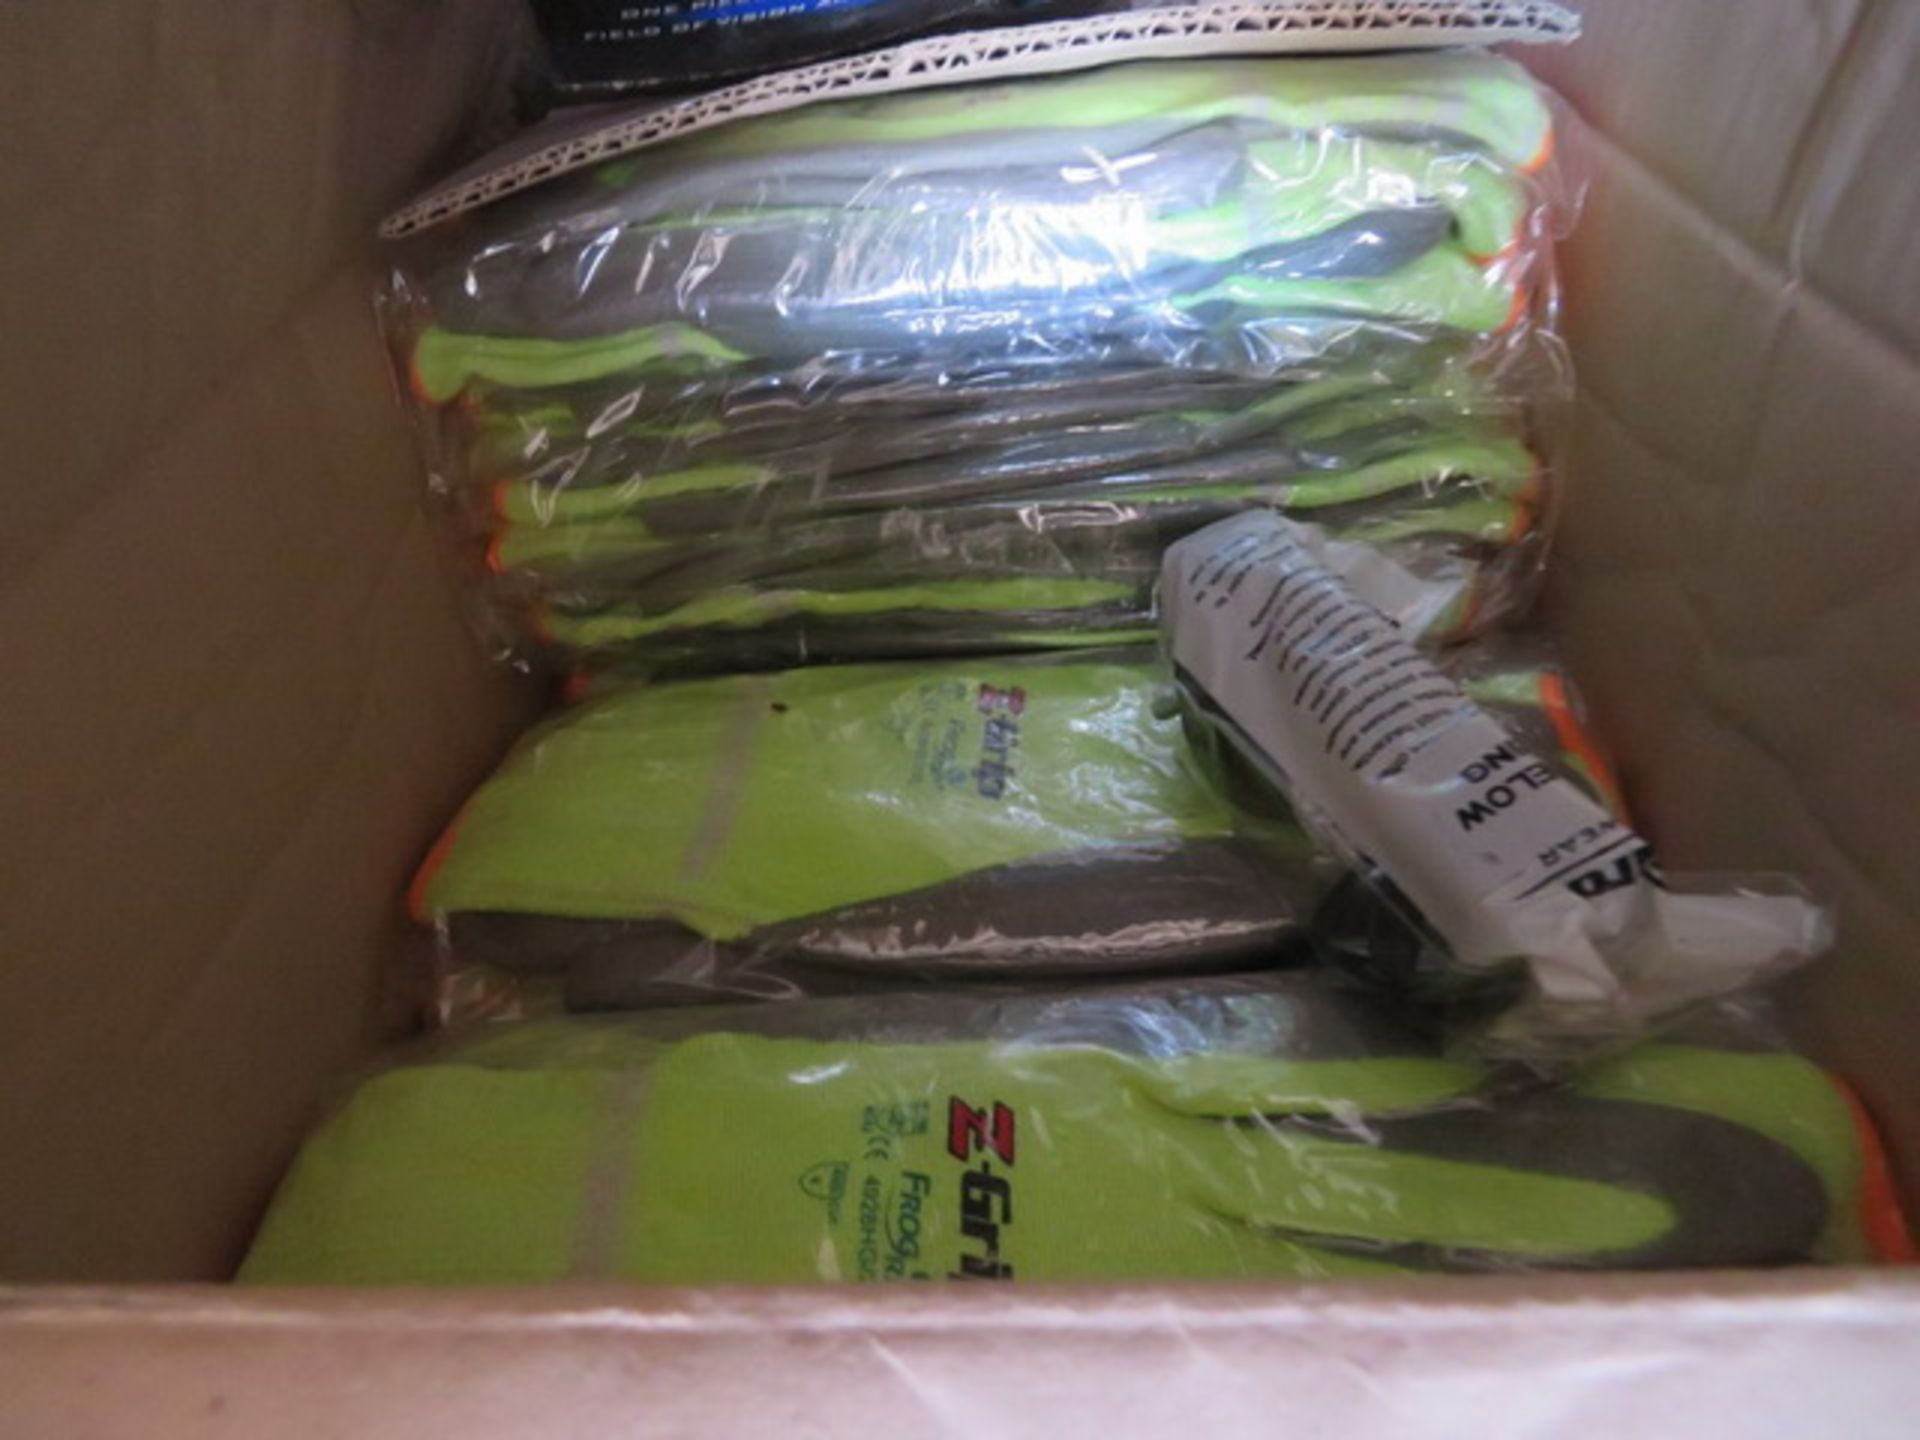 Contents of Shipping Container. To Include 1/2" PVDF Tubing, Safety Glasses, Safety Signs, - Image 29 of 51